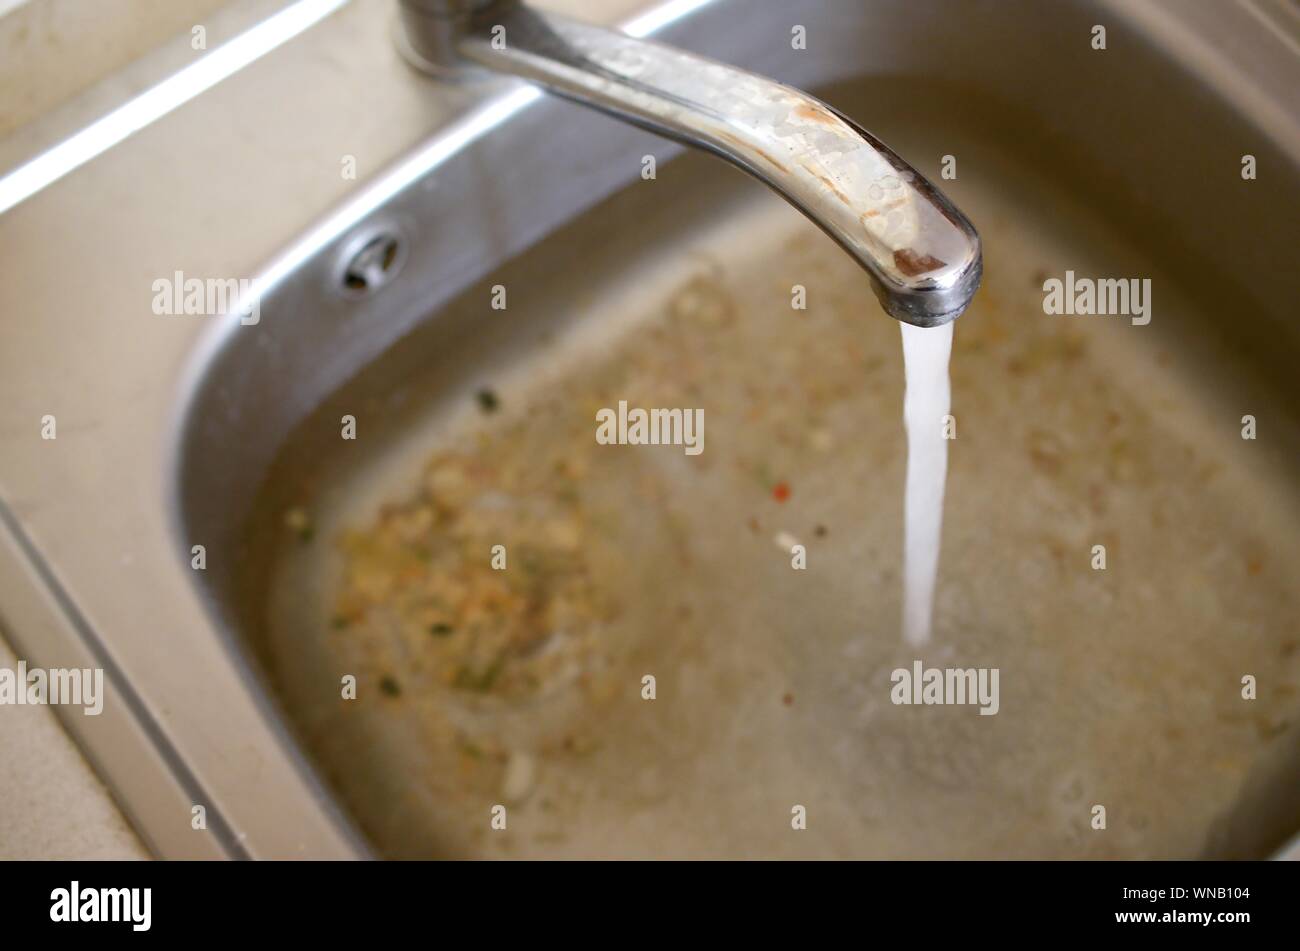 Overflowing Sink Stock Photos & Overflowing Sink Stock Images - Alamy